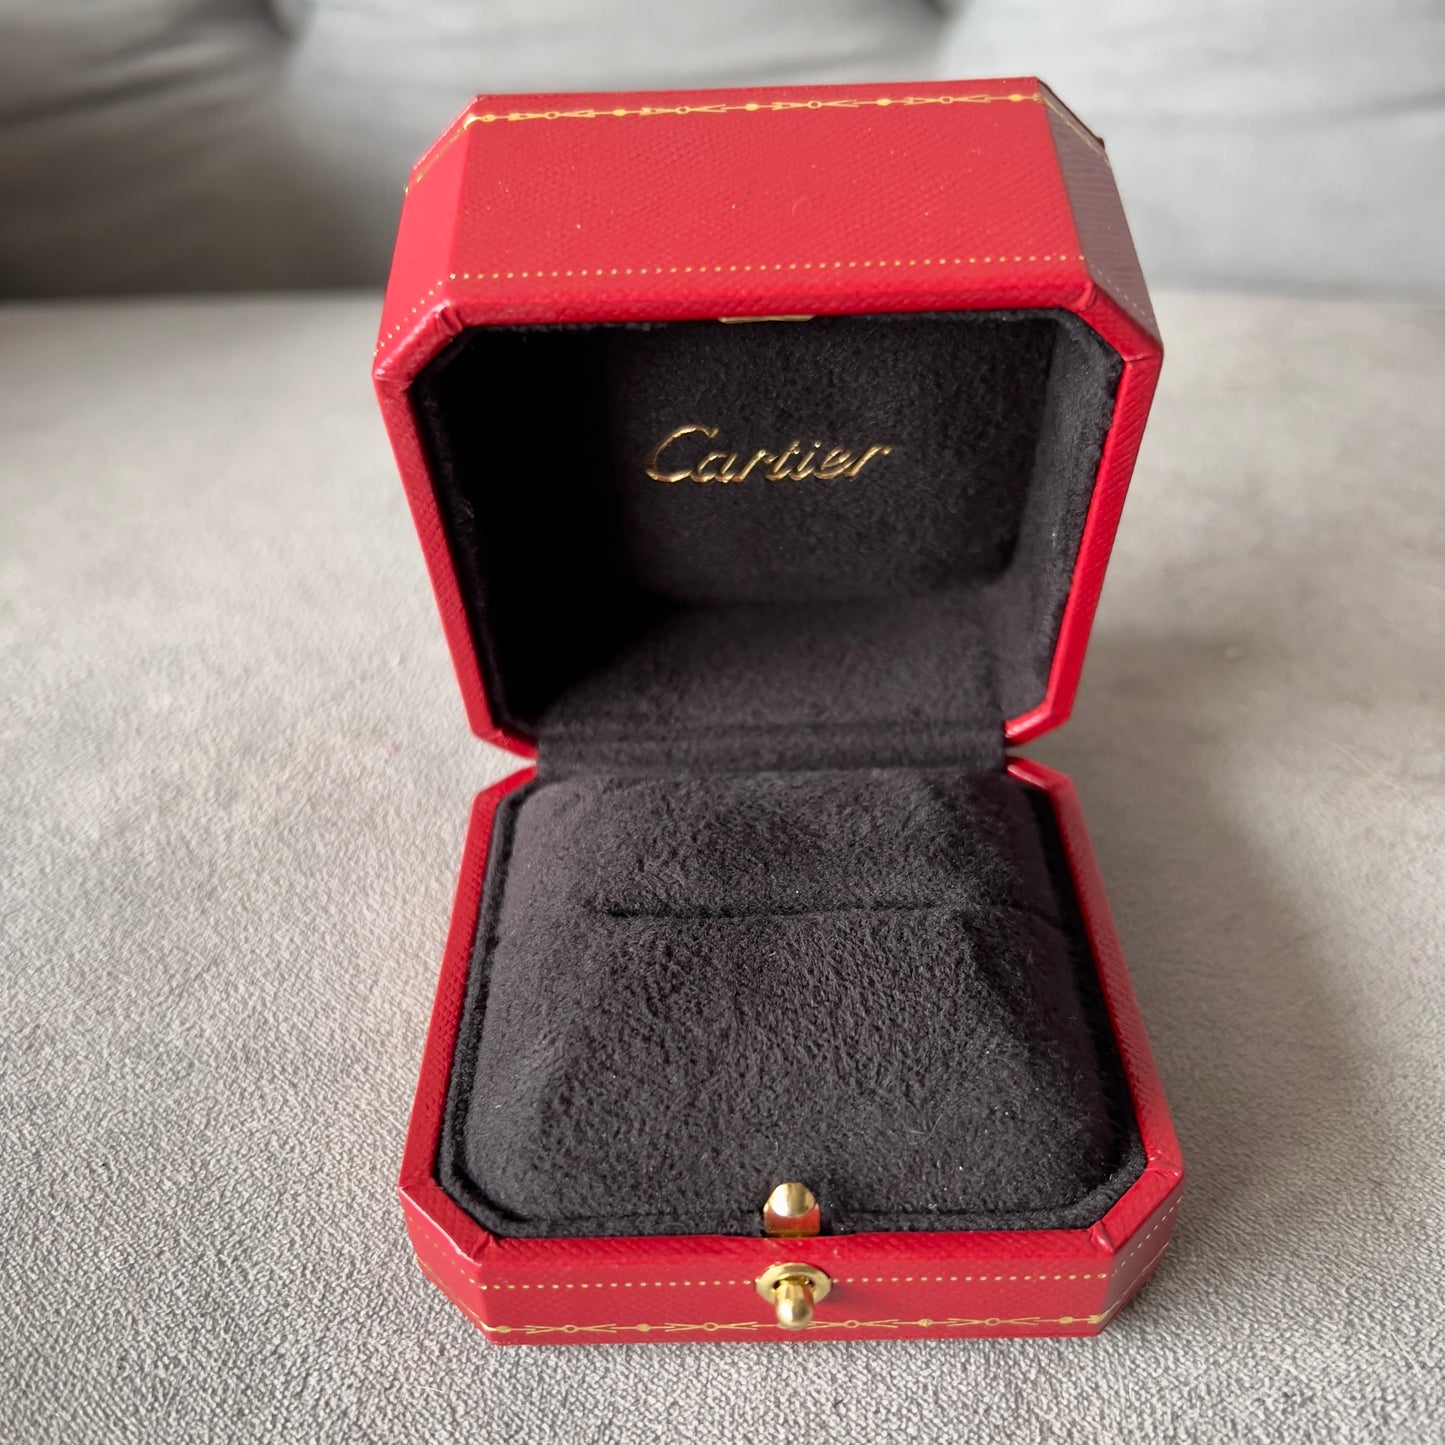 CARTIER Ring Box + Outer Box 3.40x3.25x2.40 inches